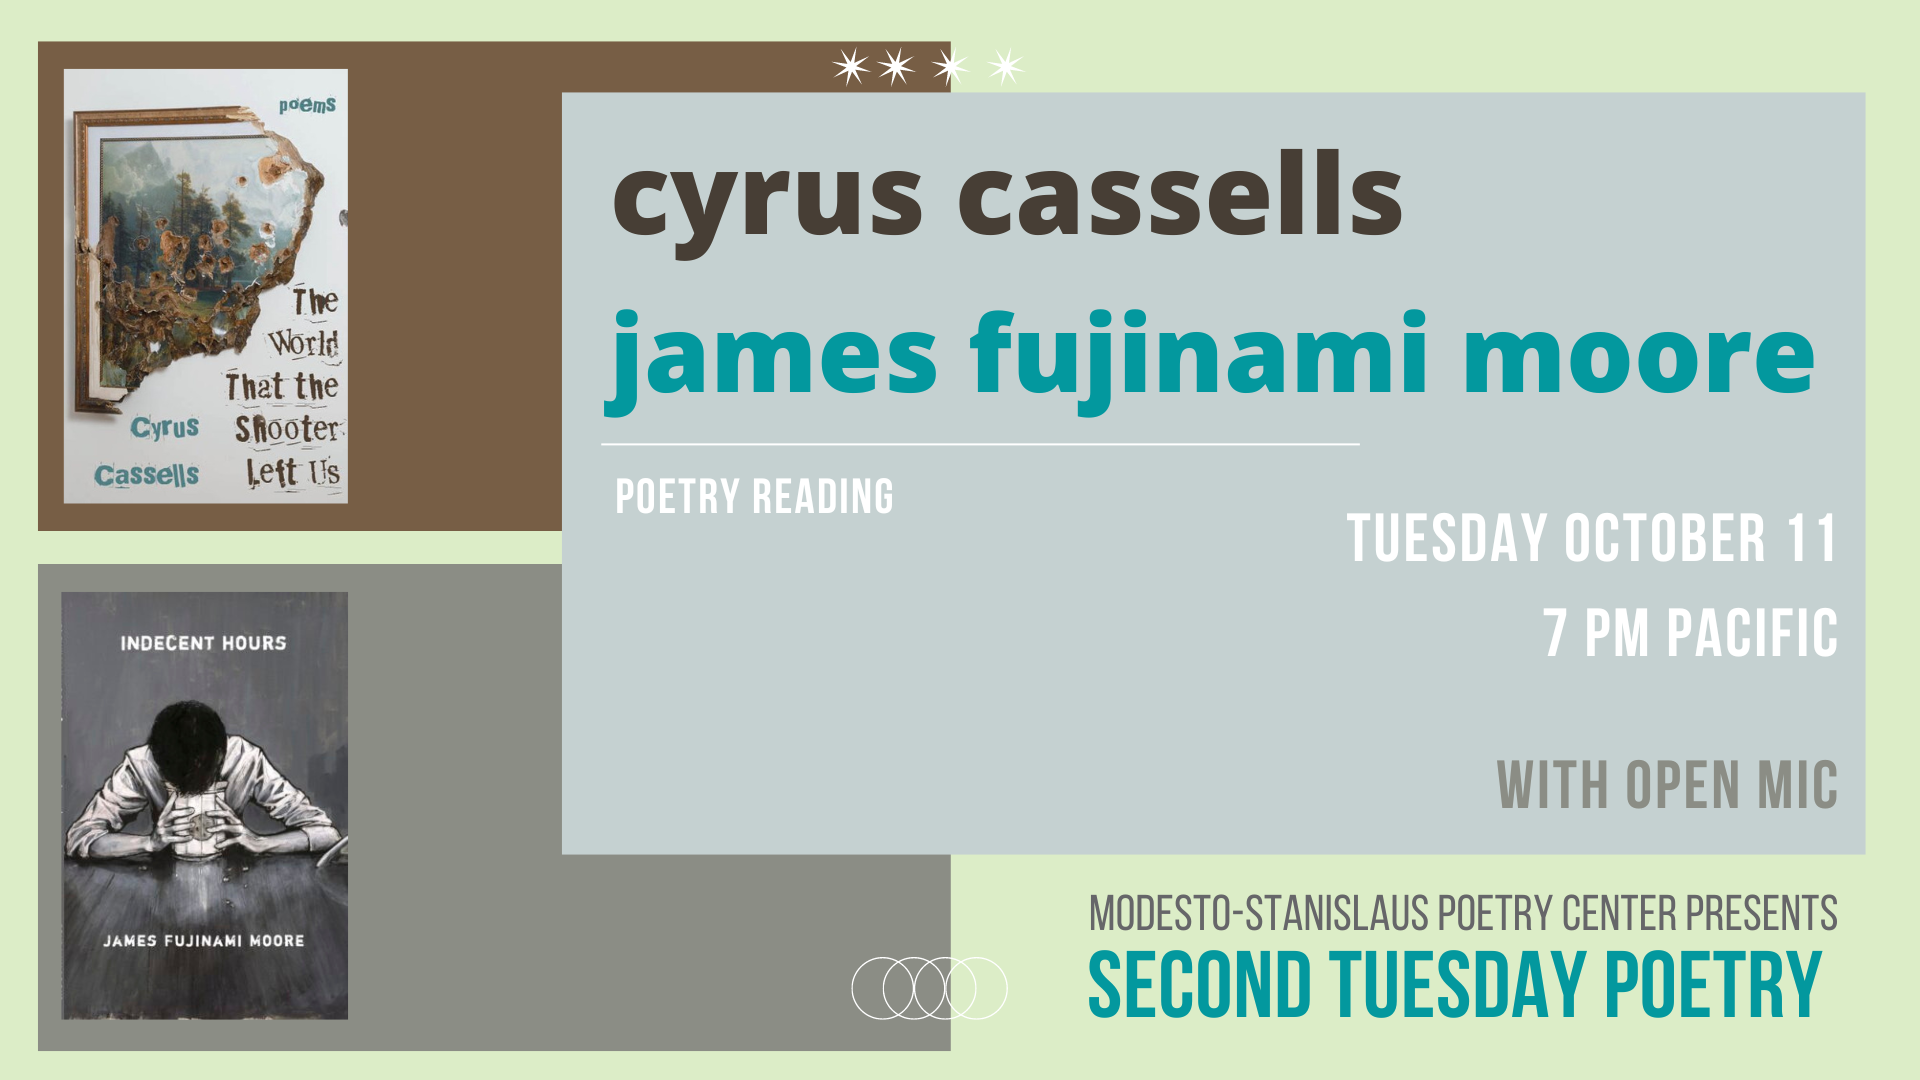 Oct 11 2022 Second Tues Poetry 7 pm with Cyrus Cassells and James Fujinami Moore